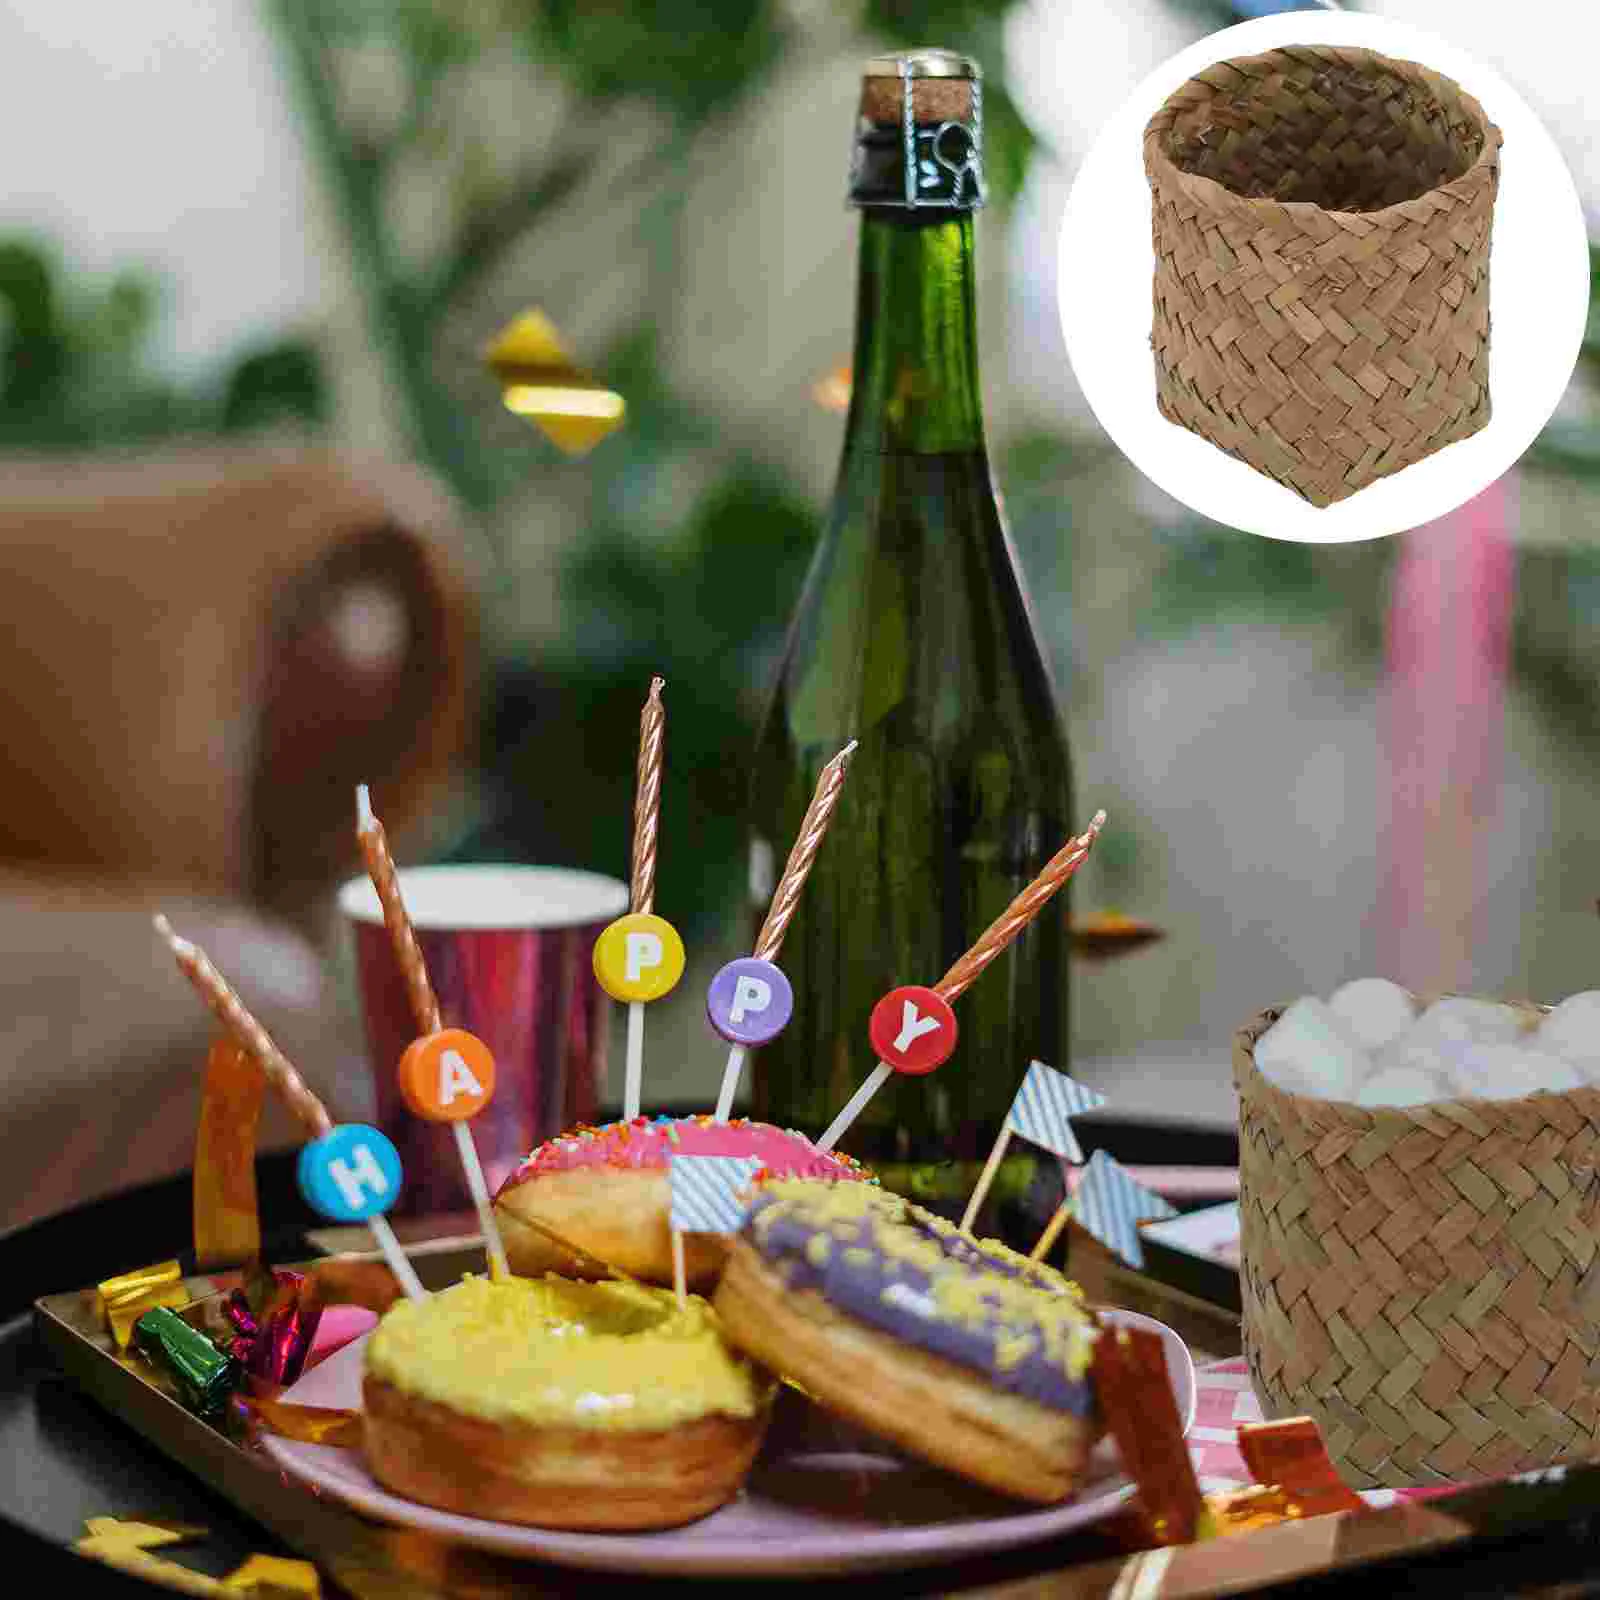 

Basket Mini Box Candy Baskets Wedding Woven Storage Boxes Case Gift Flower Rattan Holder Seagrass Party Wicker Chocolate